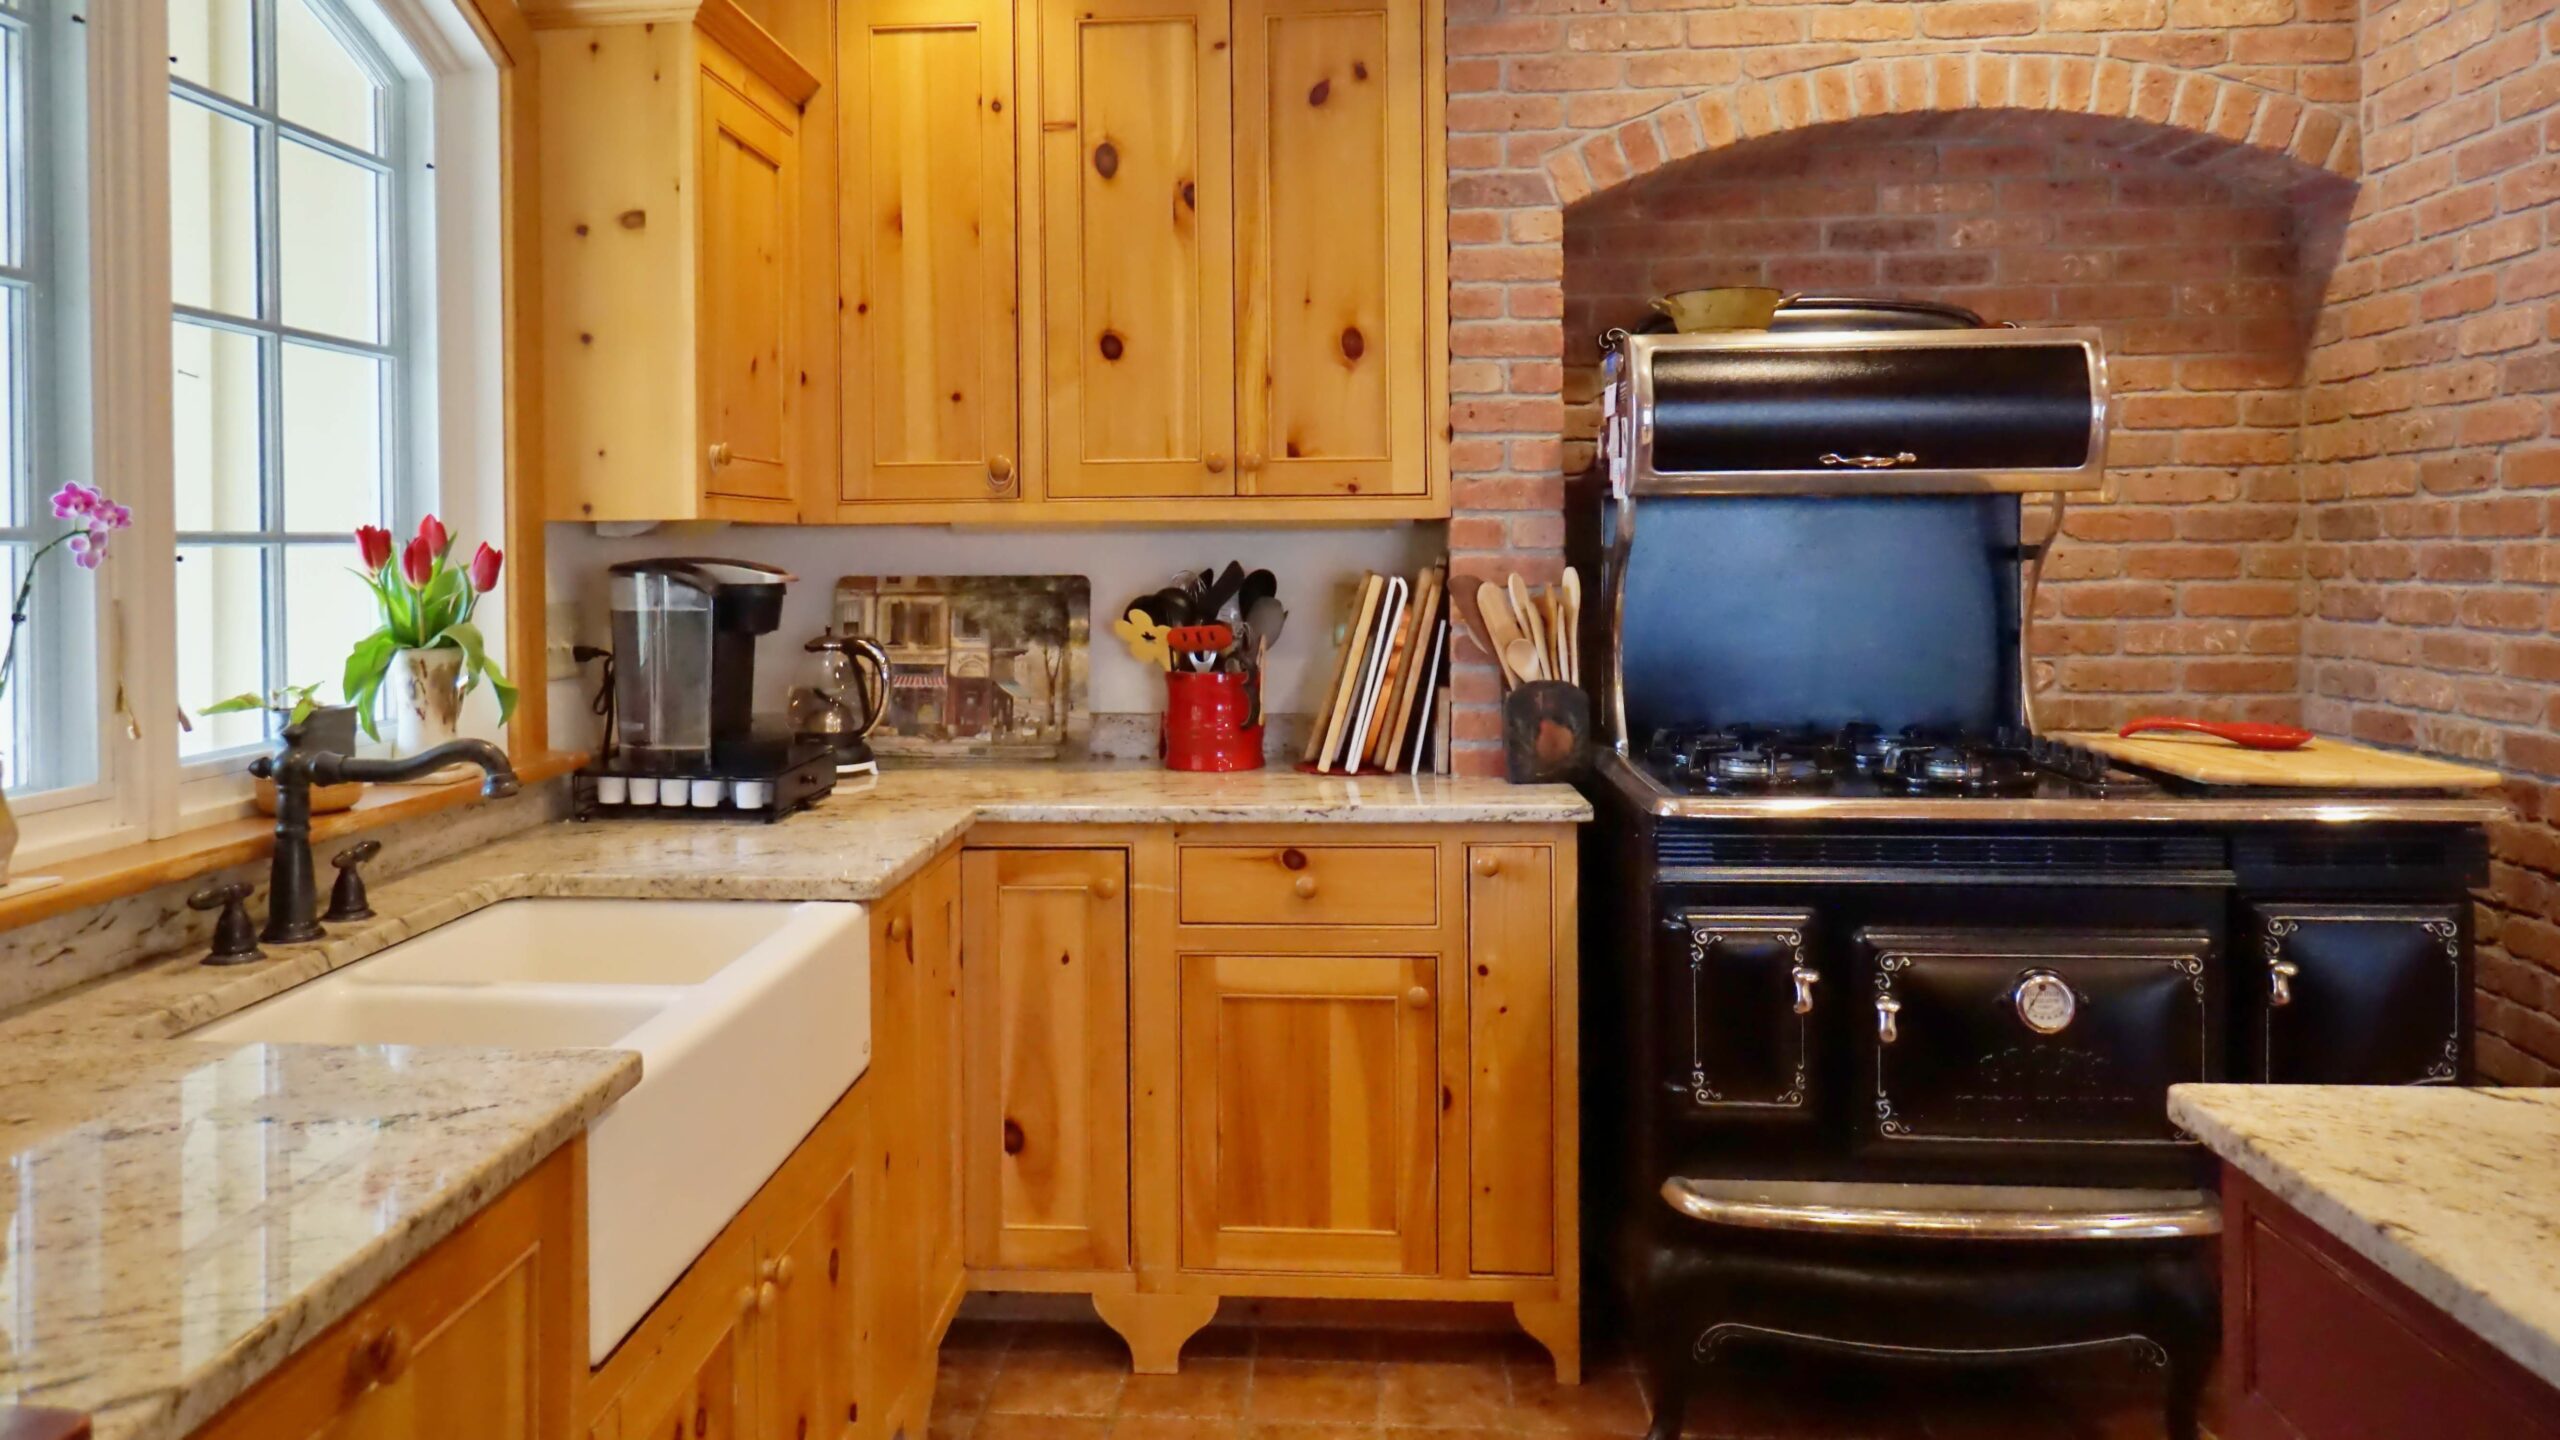 Florence, MA (5066) kitchen with rustic range surrounded by brick